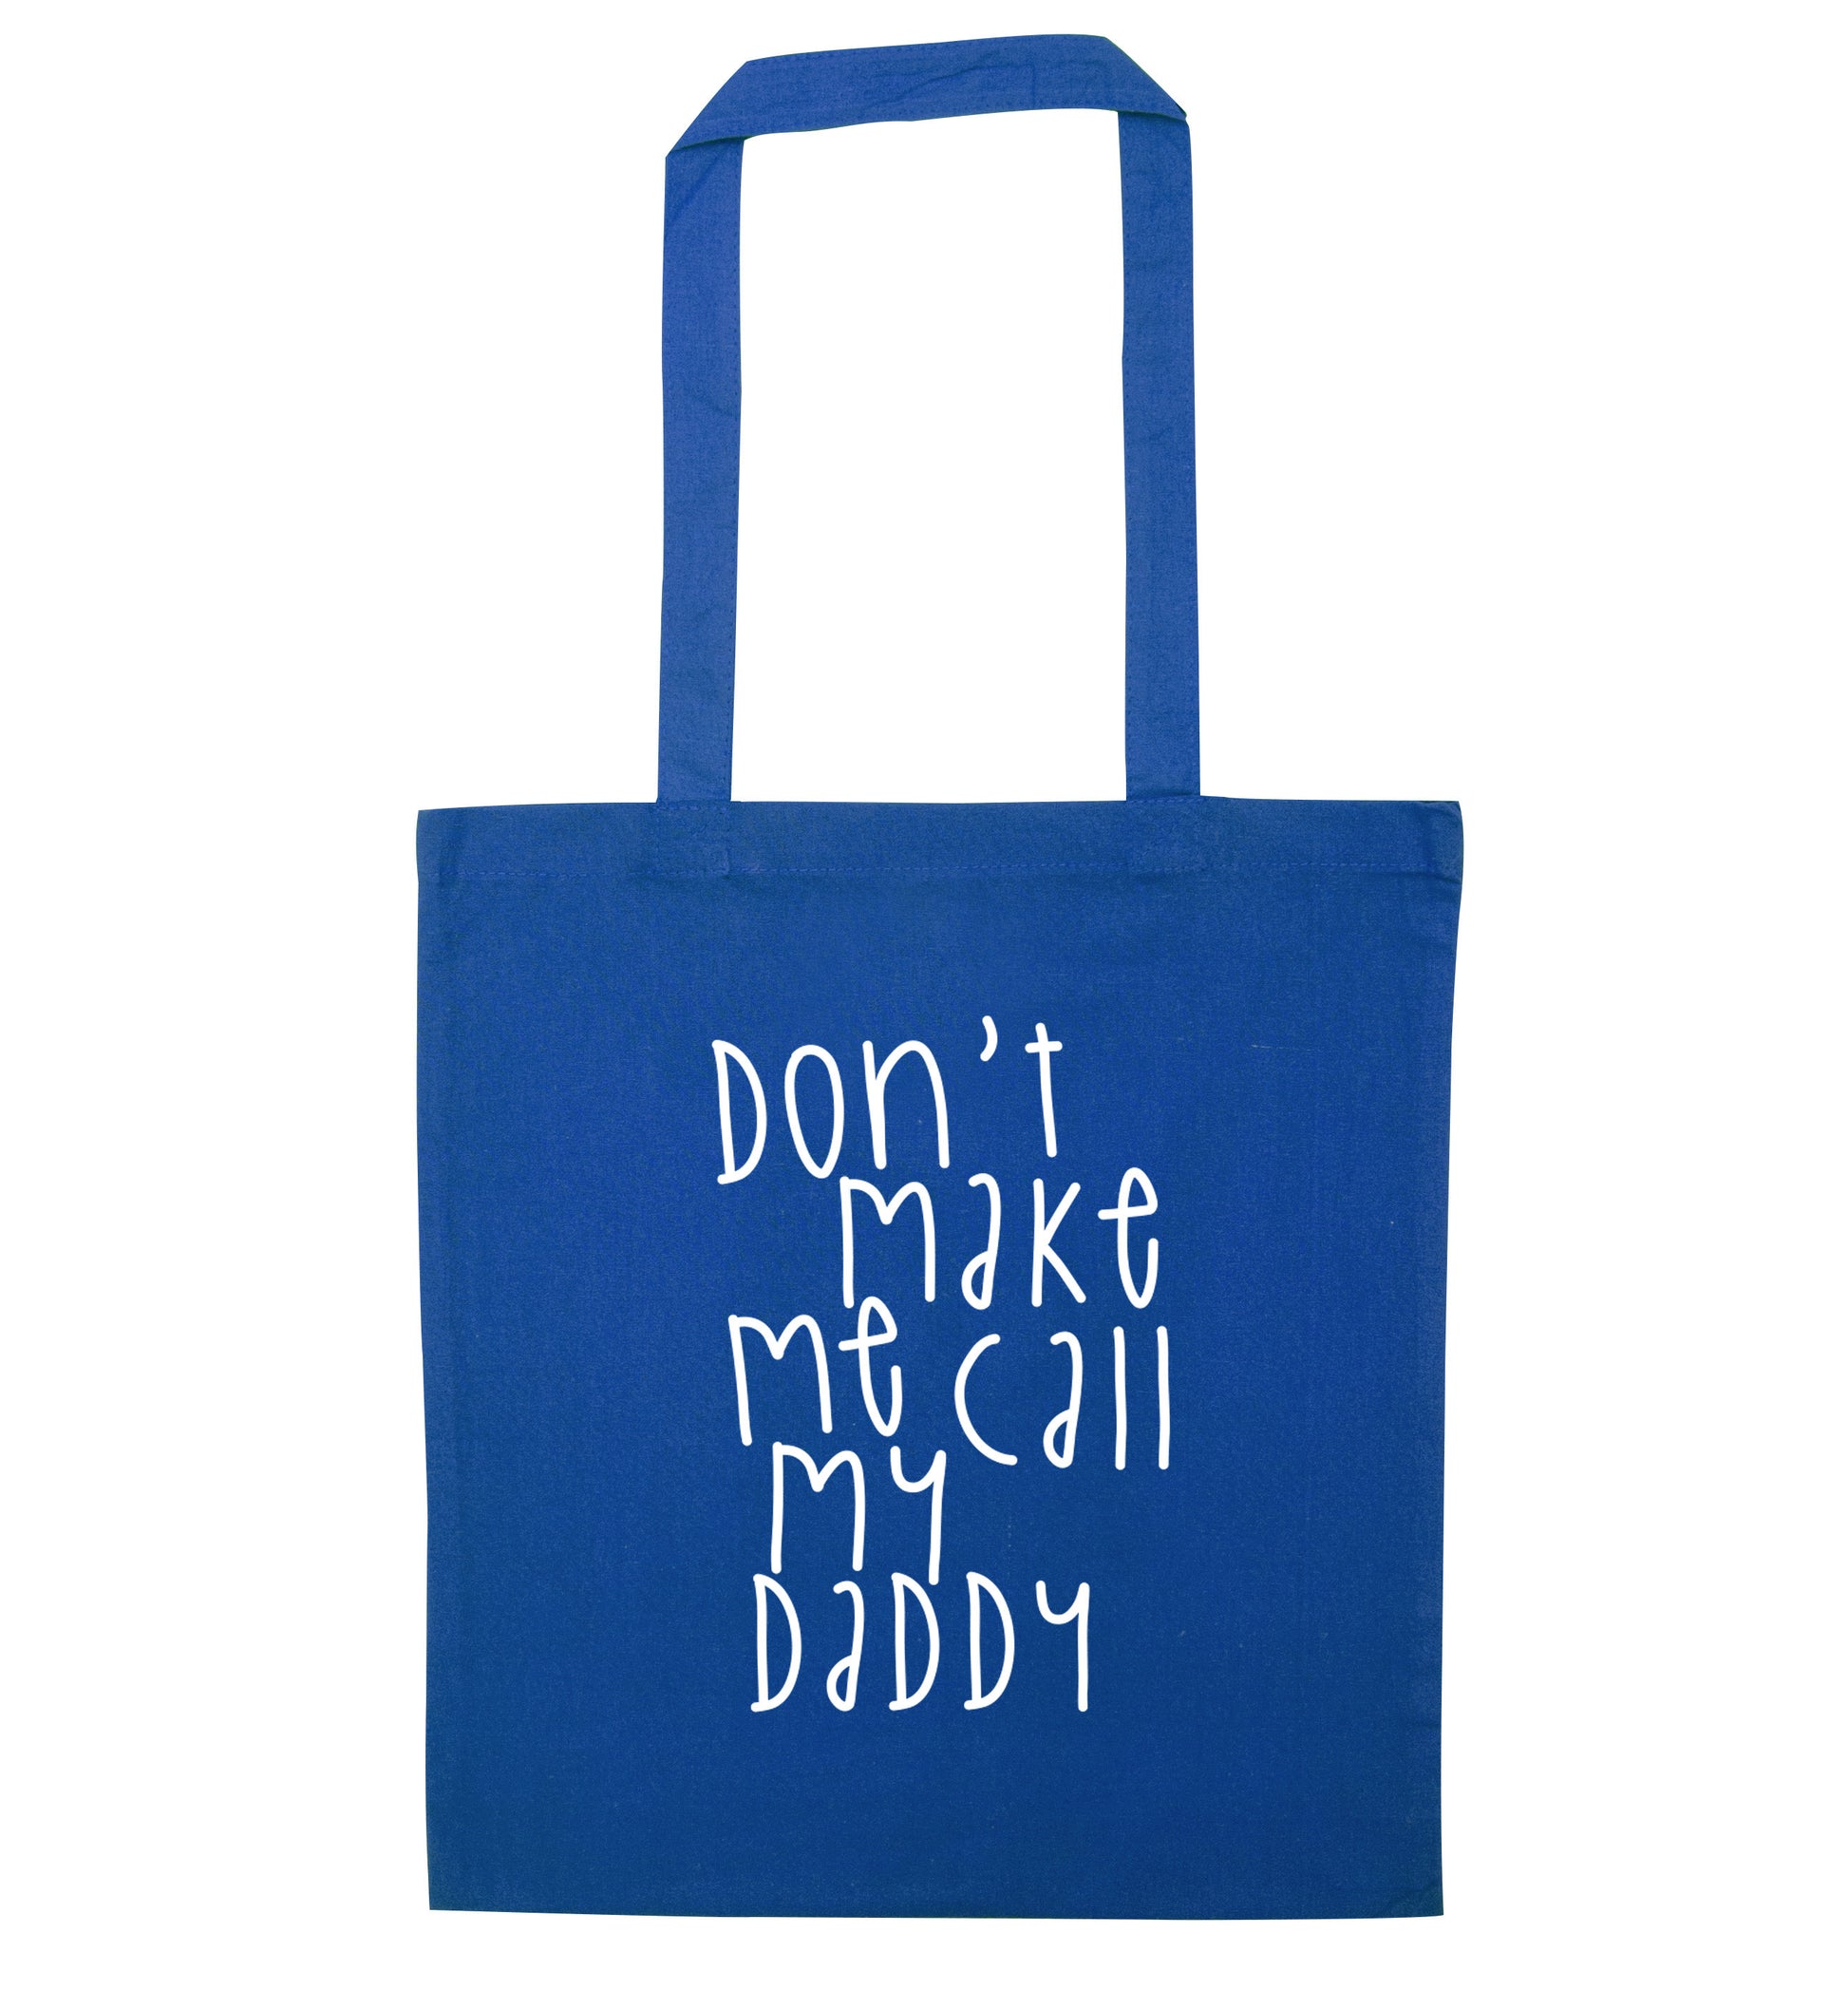 Don't make me call my daddy blue tote bag